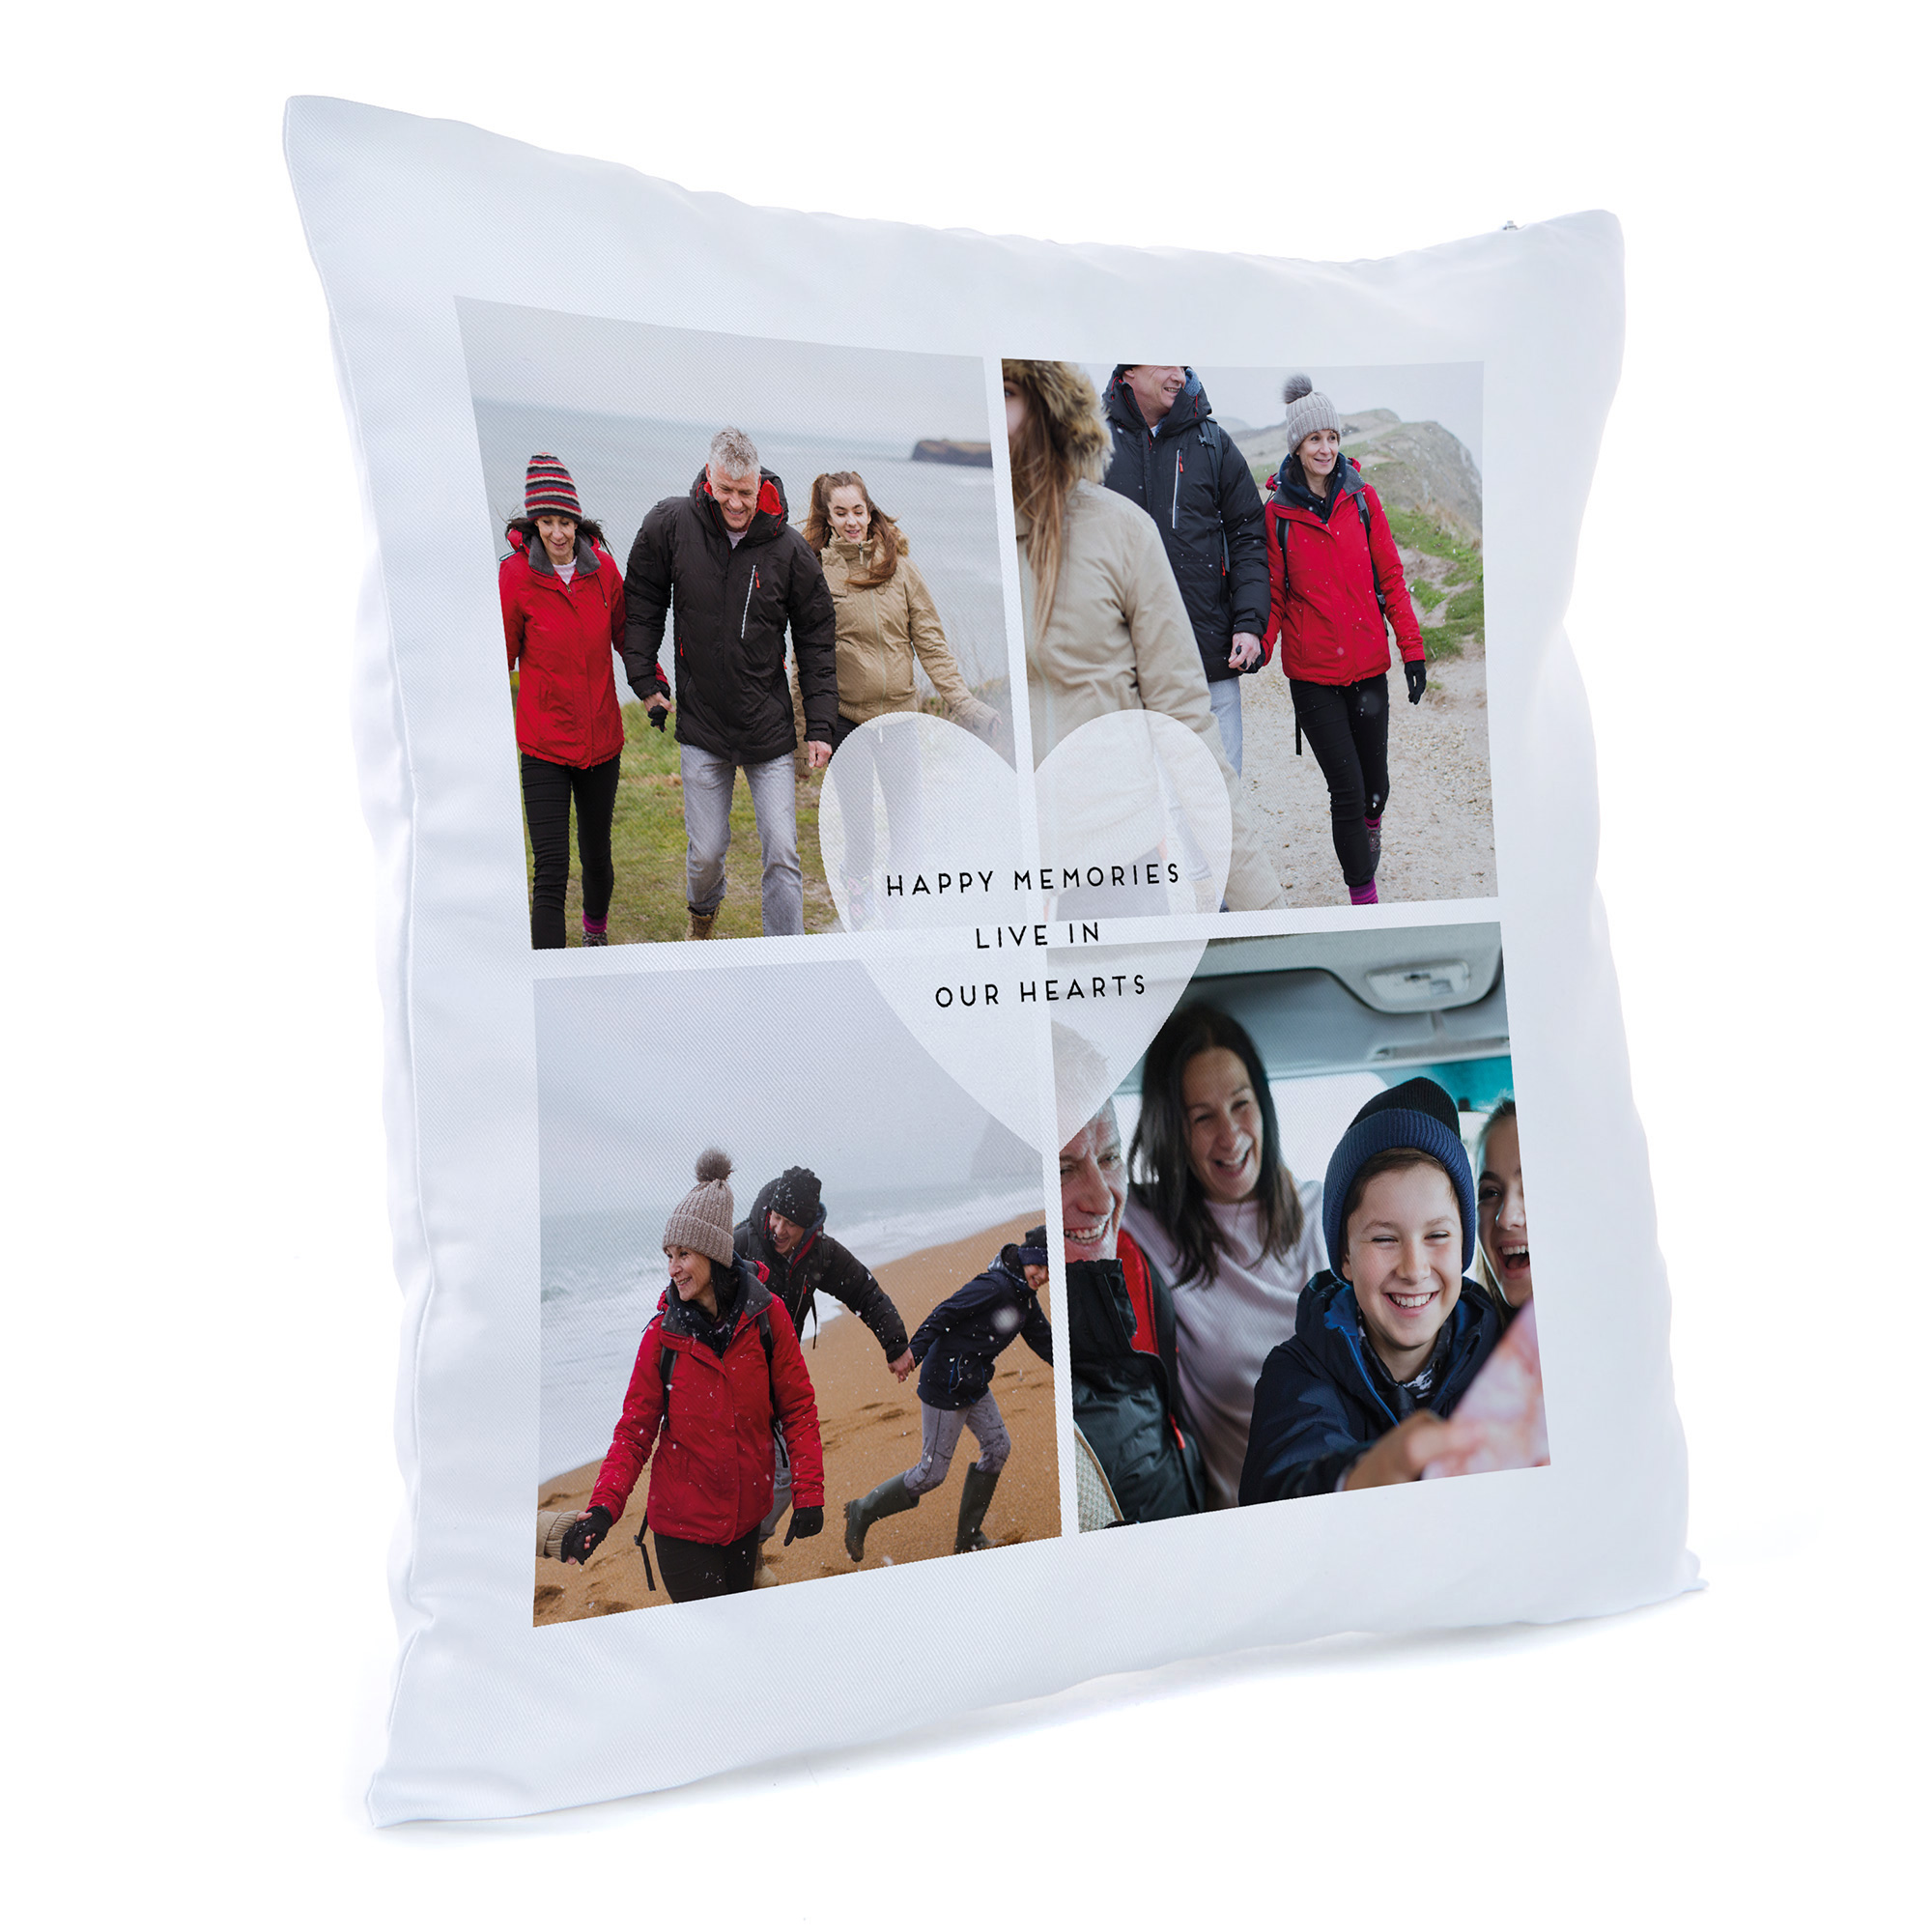 Personalised Photo Cushion - Happy Memories Live In Our Hearts